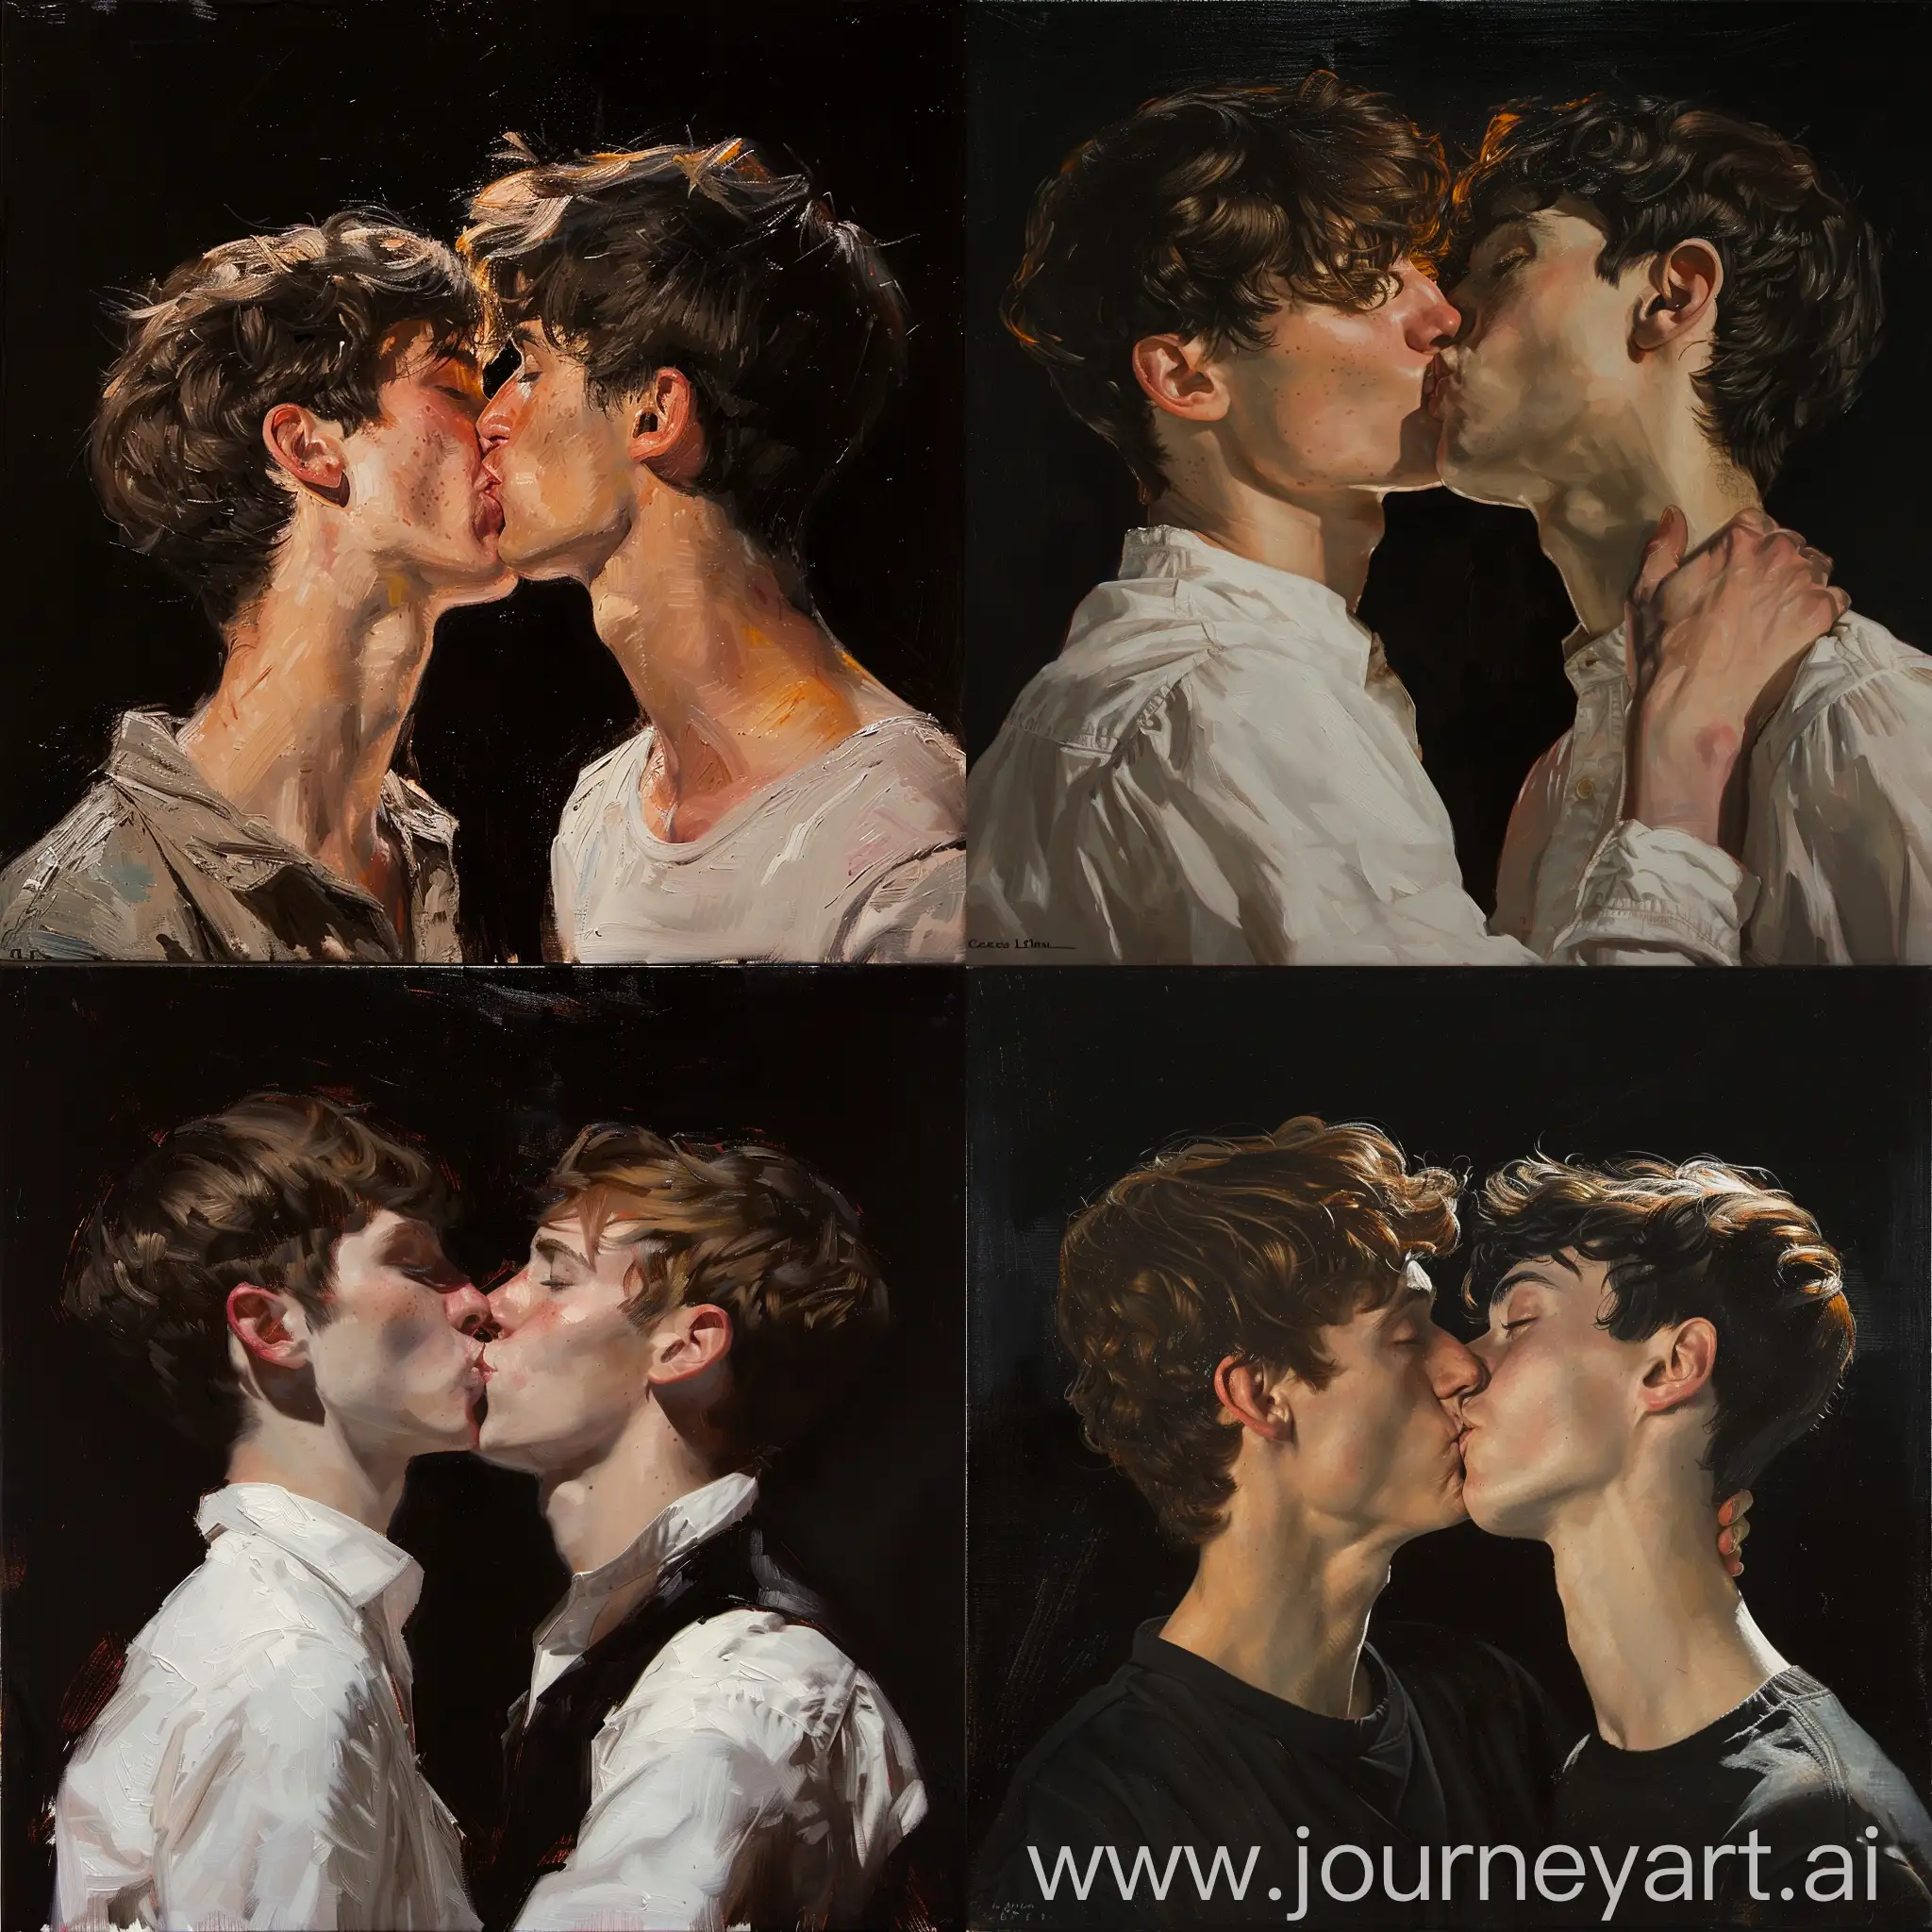 Oil sketch of a two young men kissing, wlop John singer Sargent, jeremy lipkin and rob rey, range murata jeremy lipking, John singer Sargent, black background, jeremy lipkin, lensculture portrait awards, casey baugh and james jean, detailed realism in painting, award-winning portrait, amazingly detailed oil painting